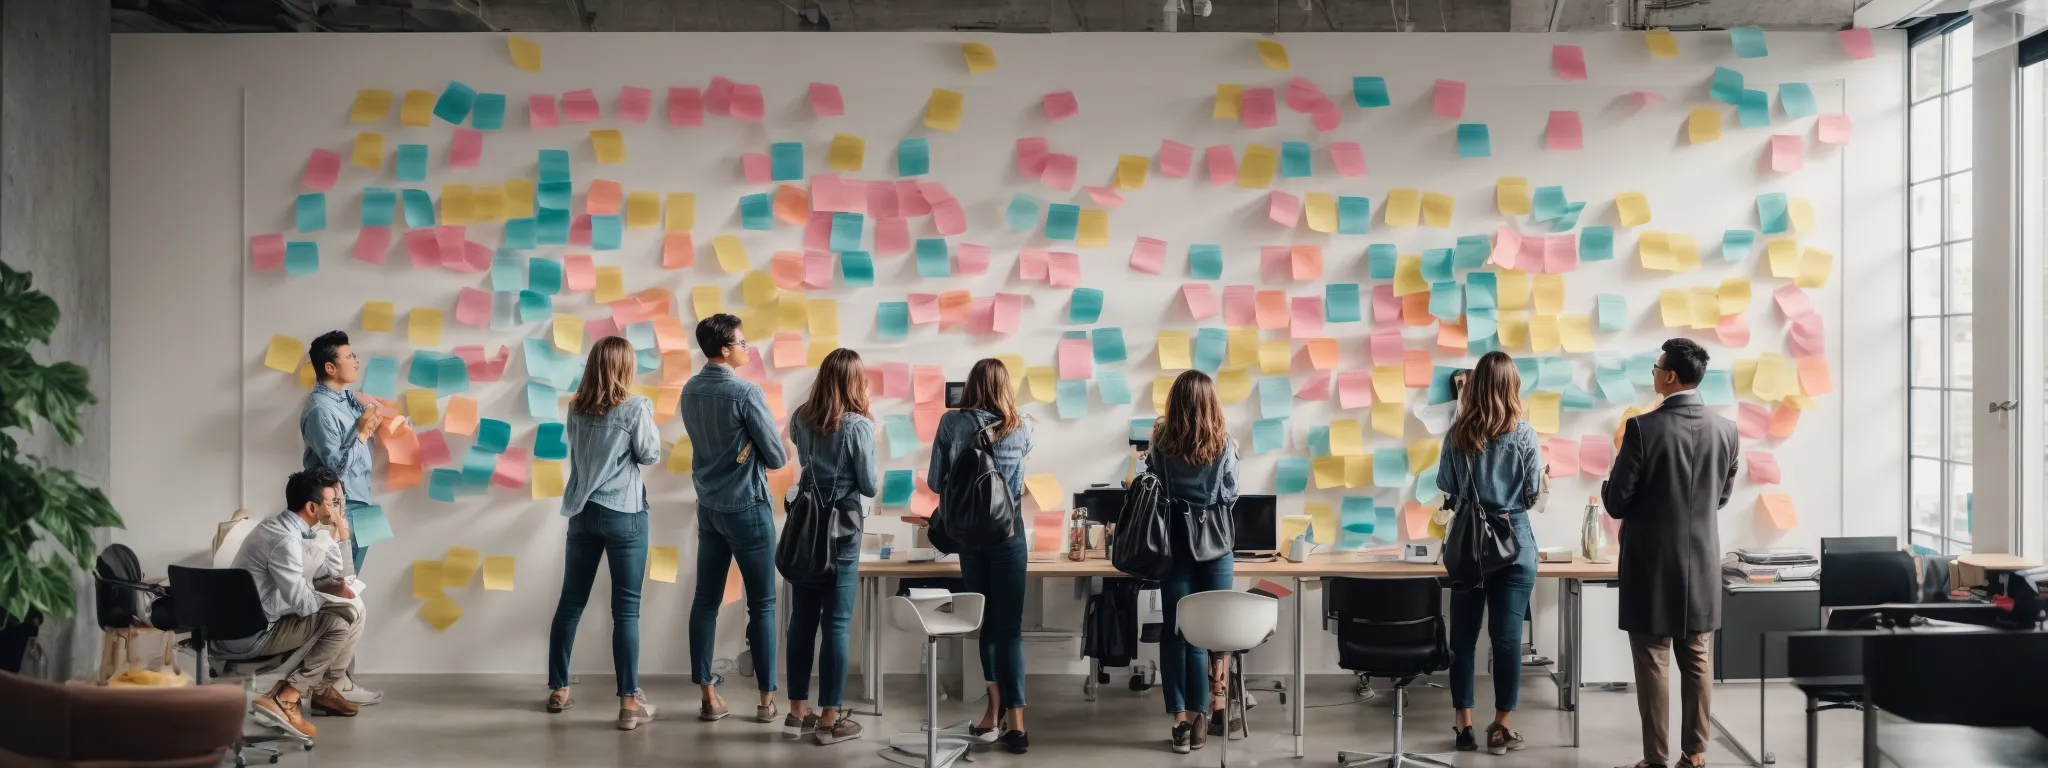 a group of professionals analyzing a large chart on a wall that represents different stages of the customer journey with colorful sticky notes and markers.